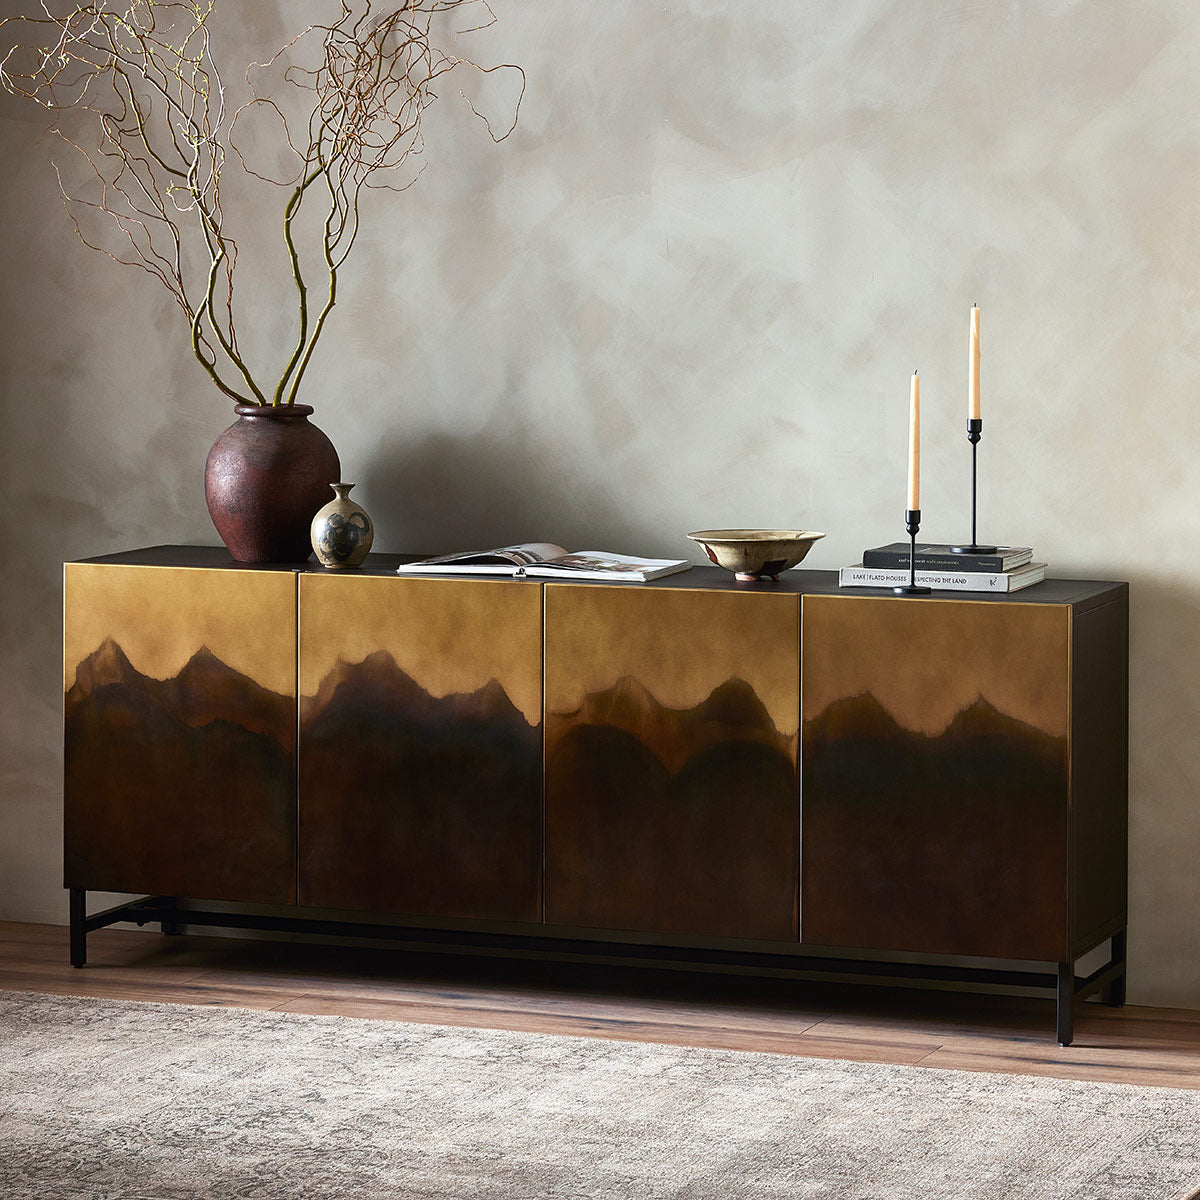 Stormy Sideboard